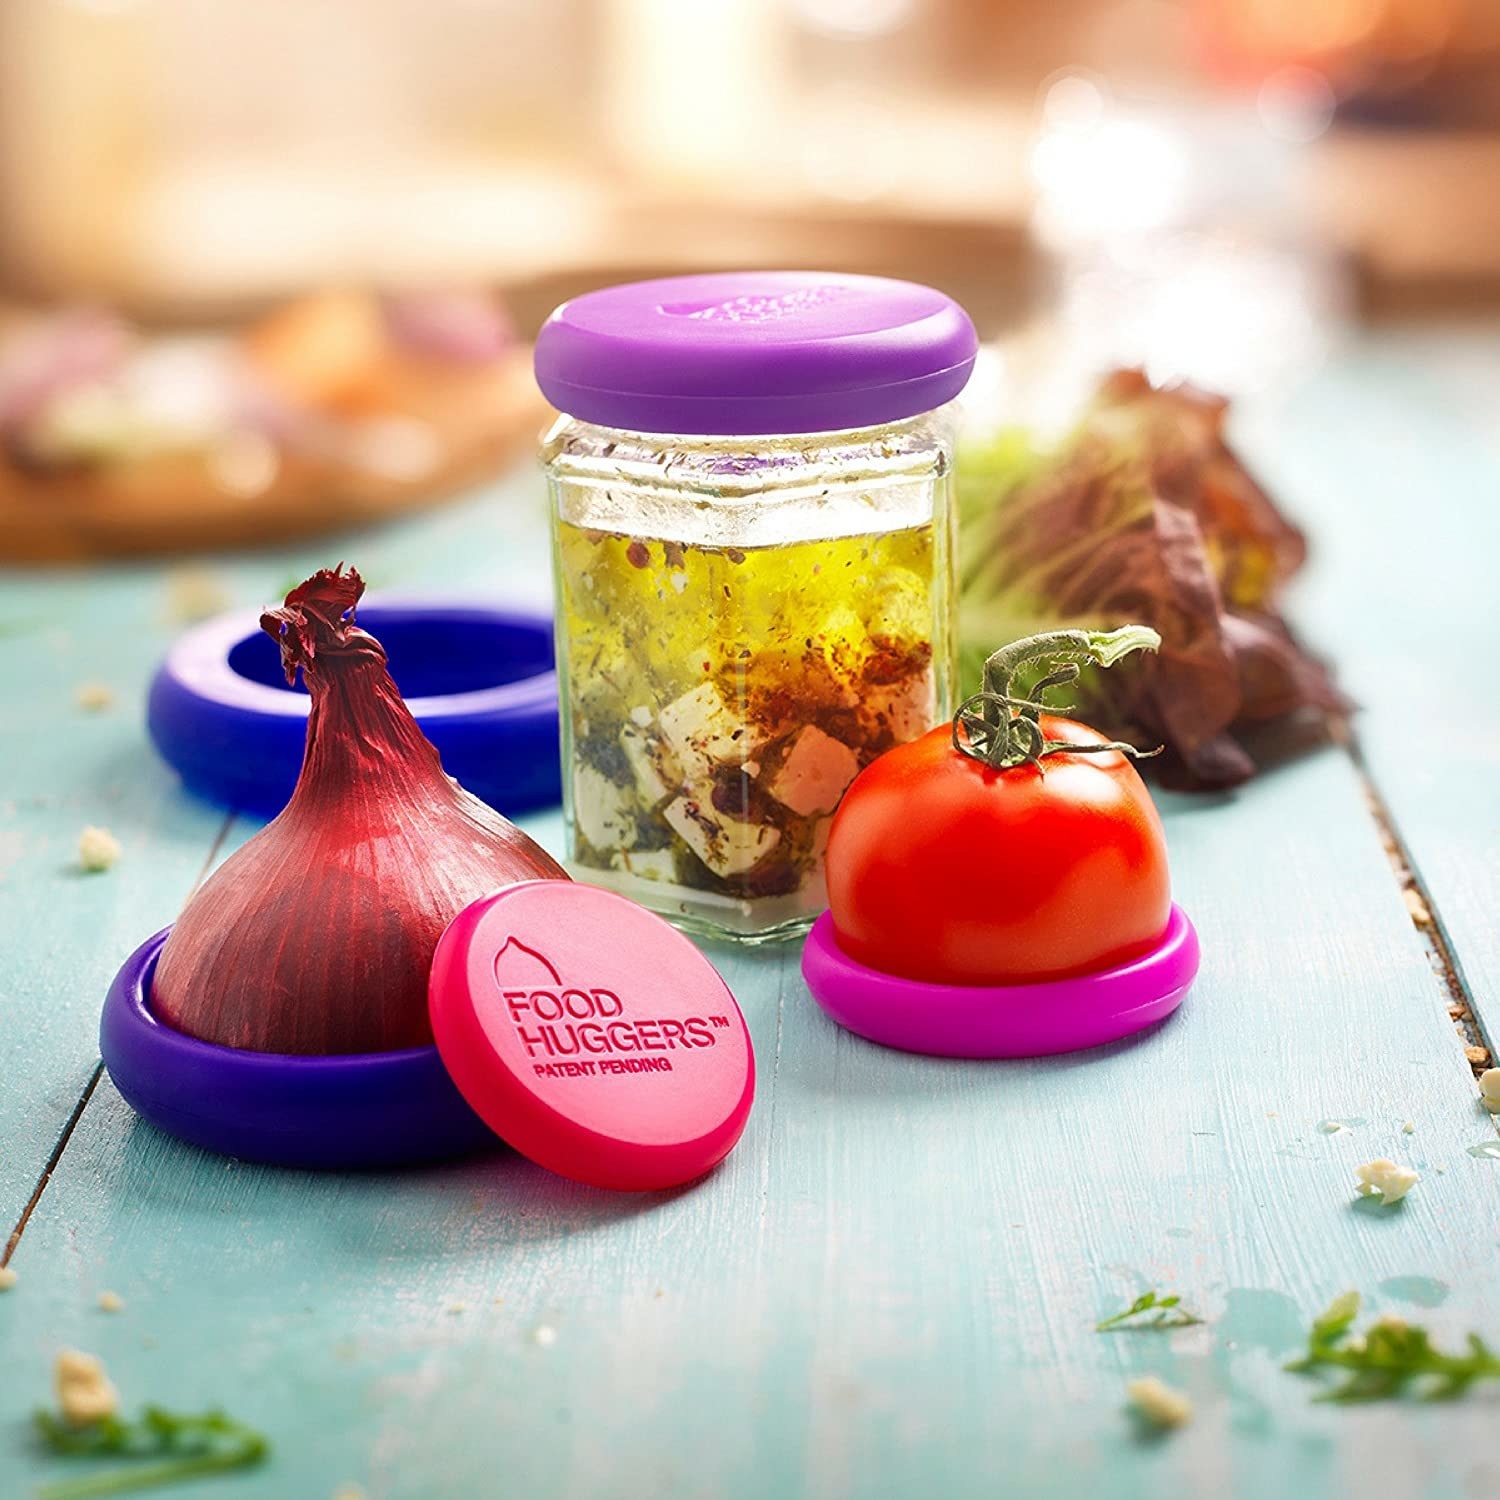 A sliced onion and tomato with silicone lids wrapped around the ends A similar silicone lid is covering a small glass jar